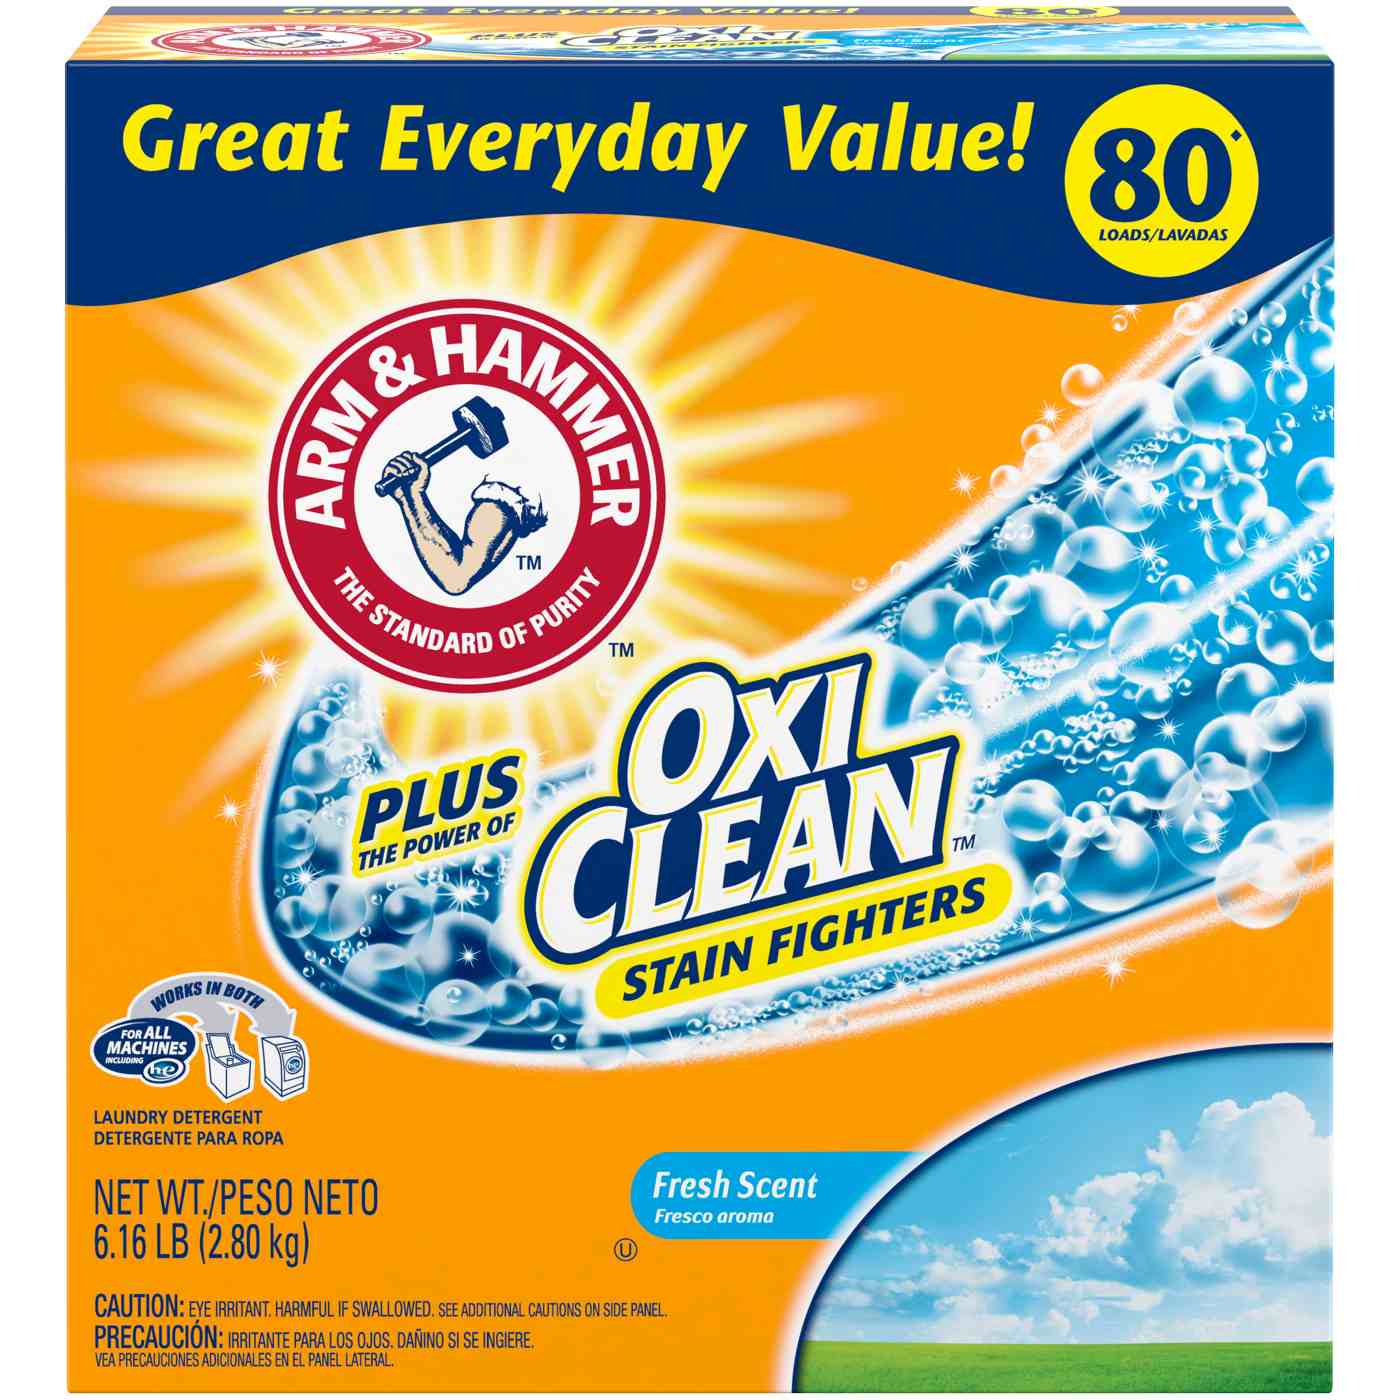 Arm & Hammer Plus OxiClean Powder Laundry Detergent, 80 Loads - Fresh Scent; image 1 of 2